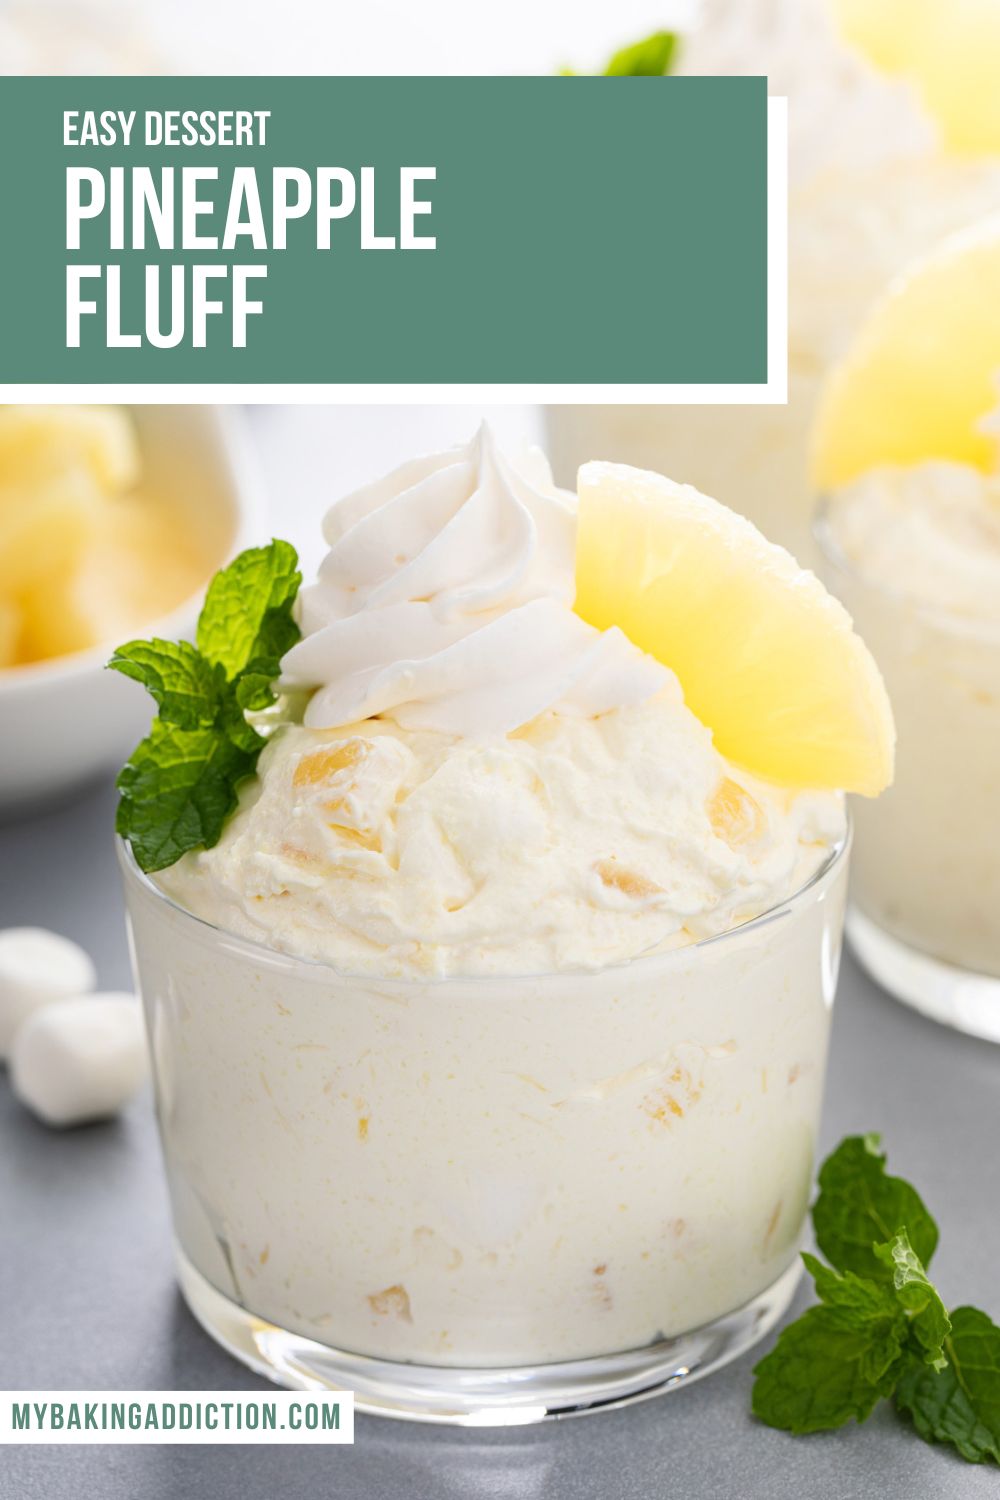 Closeup image of a glass cup filled with pineapple fluff and topped with whipped topping and pineapple. Text overlay includes recipe name.